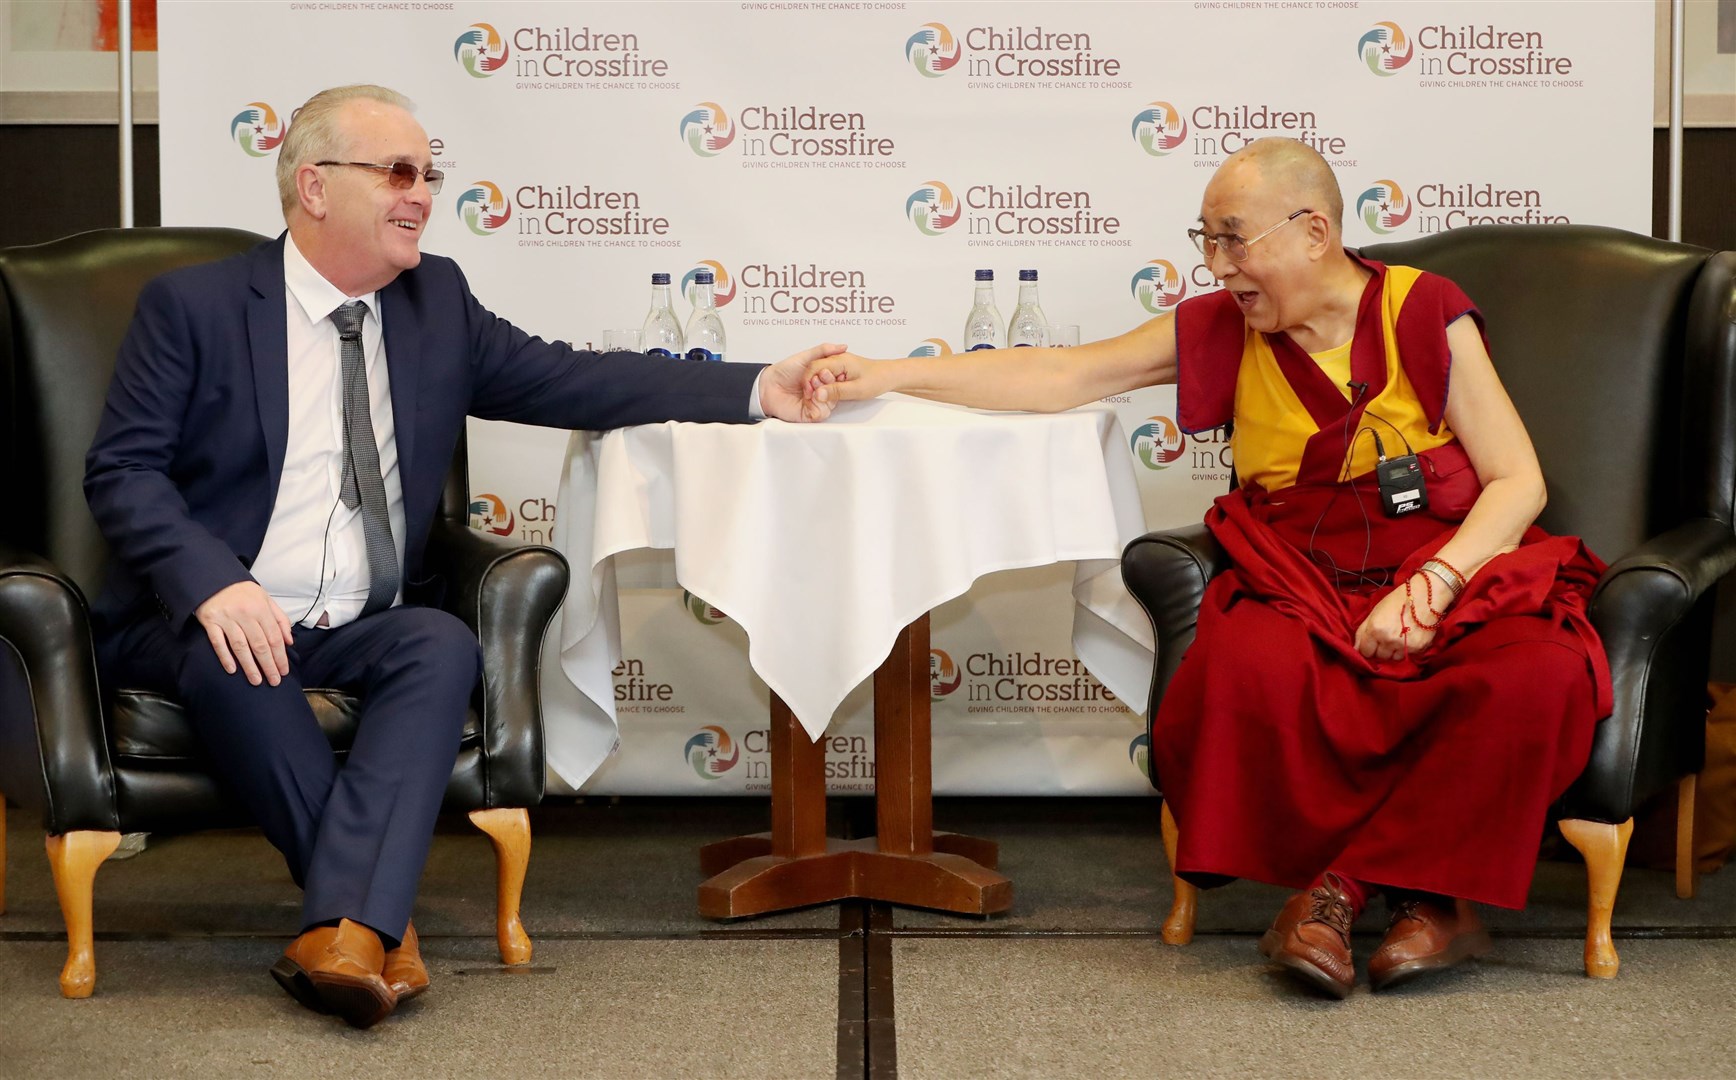 The Dalai Lama (right) holds hands with Children In Crossfire chief executive Richard Moore while speaking at the City Hotel in Londonderry (Niall Carson/PA)